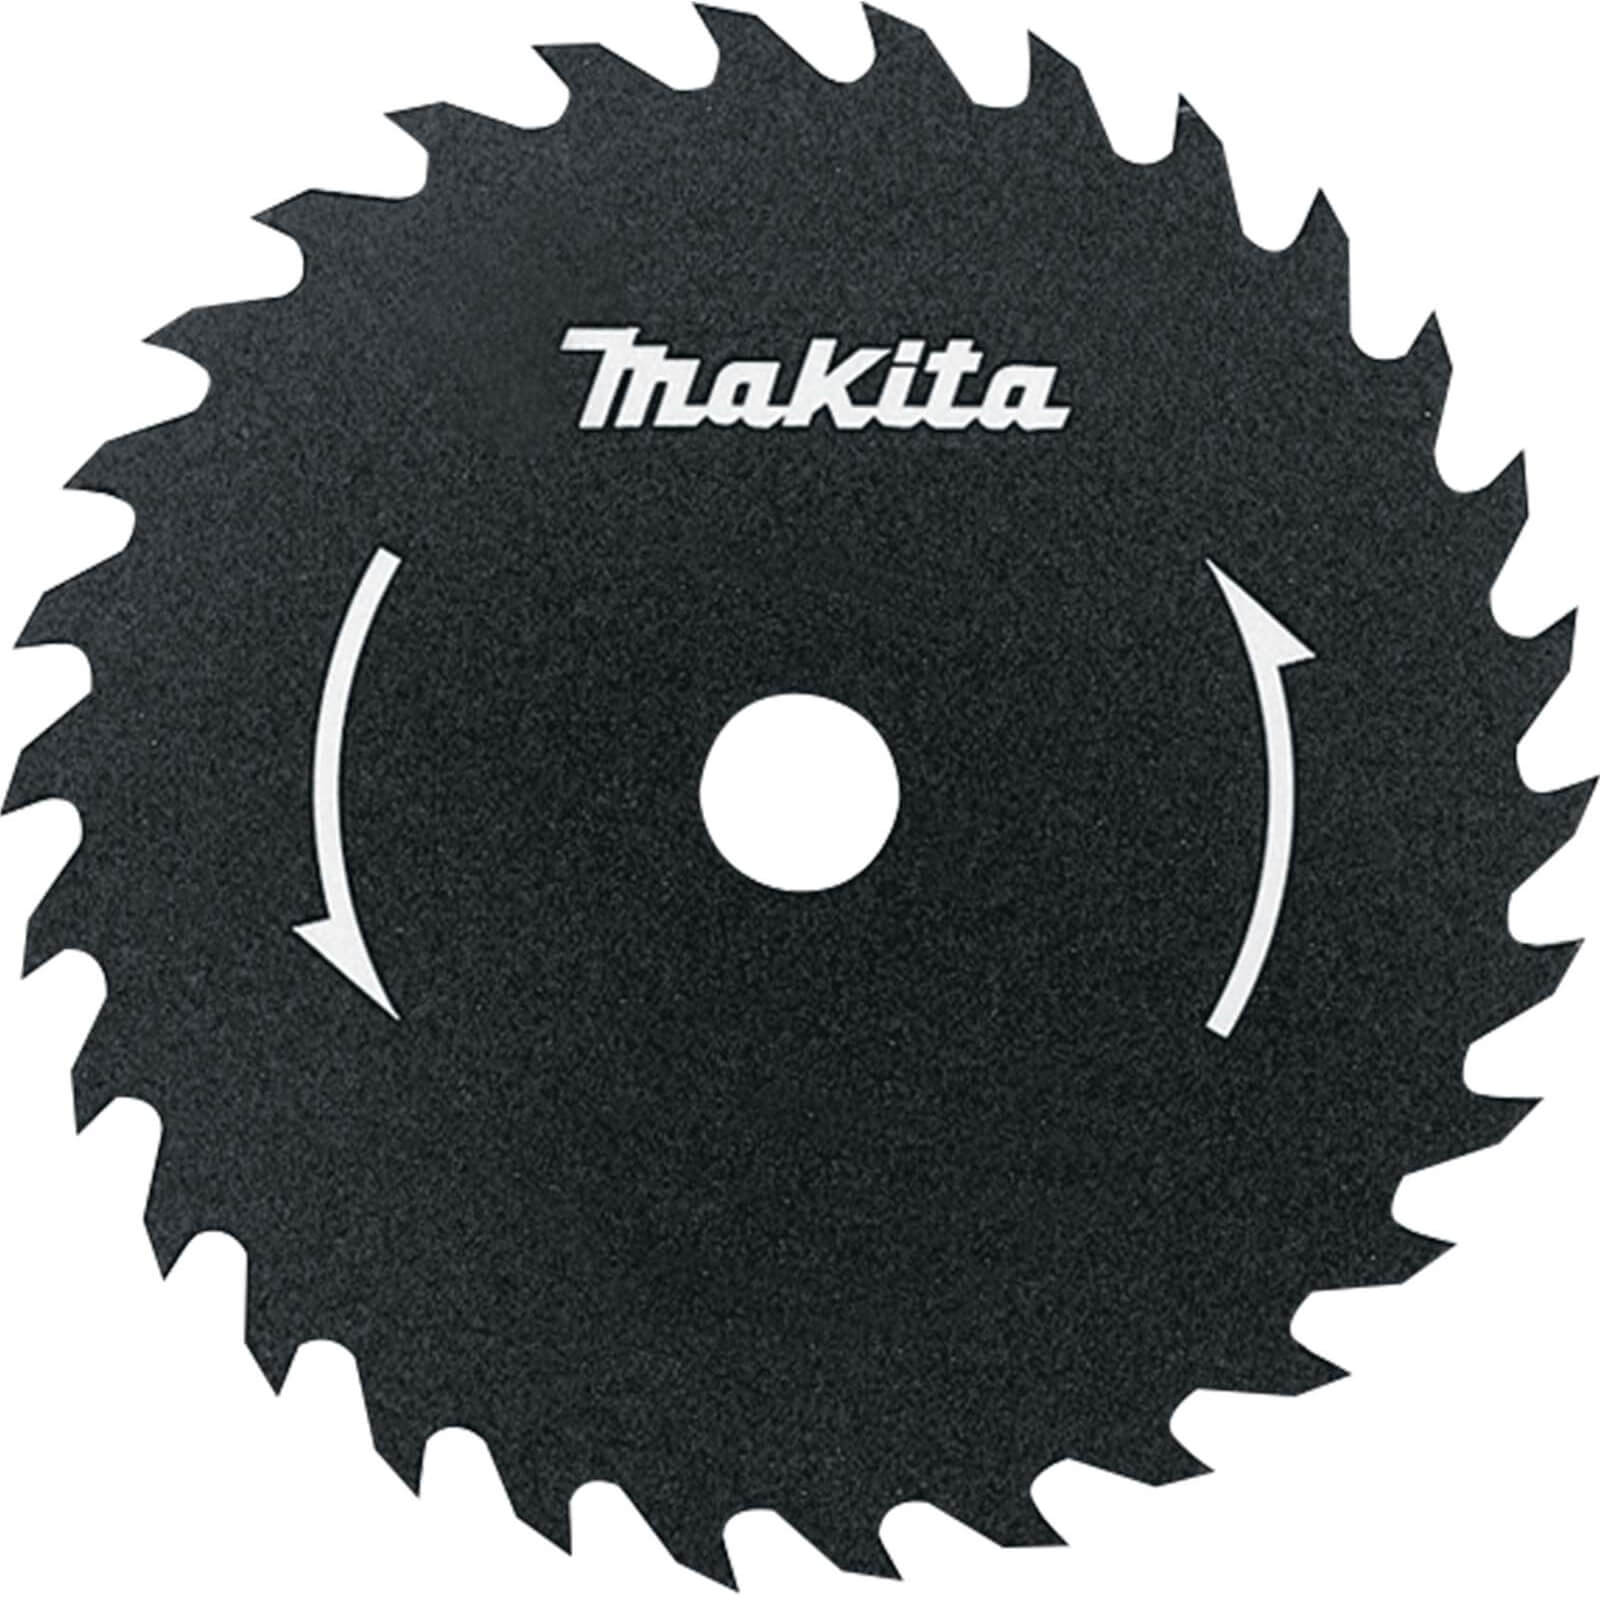 Photos - Hedge Trimmer Makita Saw Blade 255mm for  Grass Cutters B-14168 